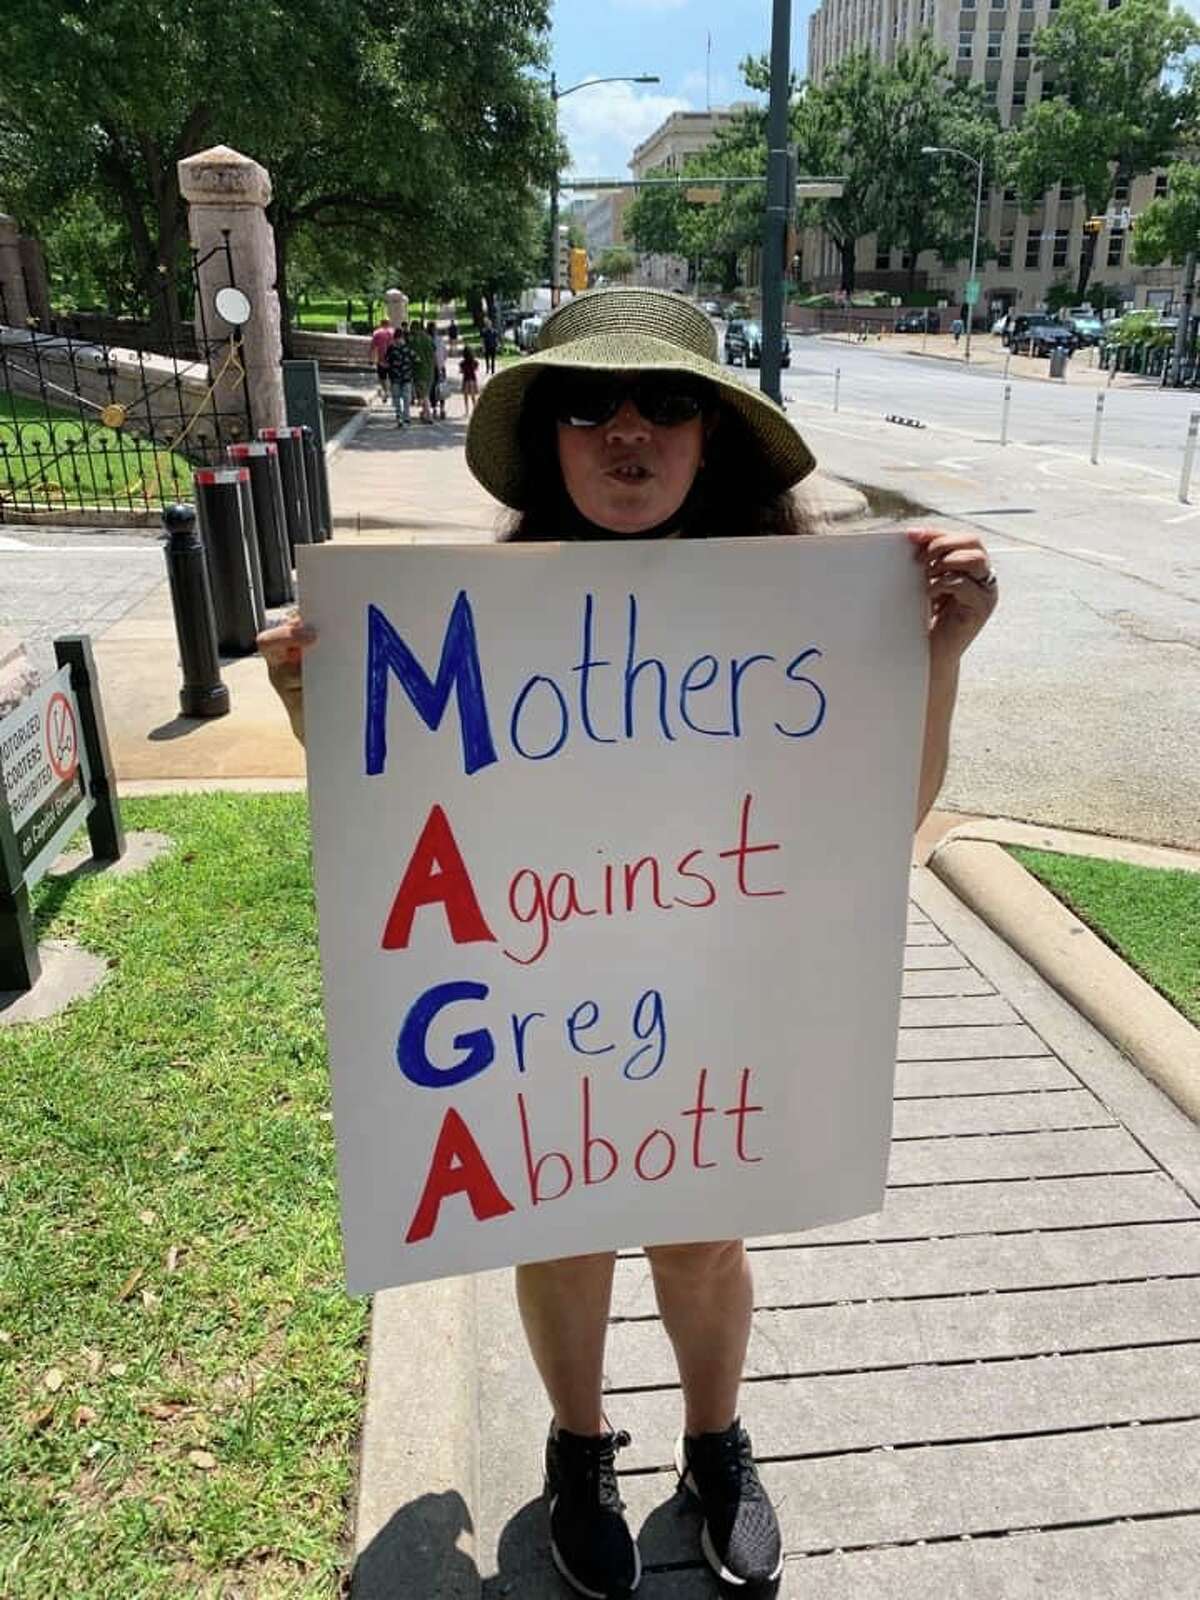 Mothers Against Greg Abbott founder Nancy Thompson is seen protesting outside of the Austin Capitol on Aug. 6. The 51-year-old said she's fed up with Gov. Greg Abbott's face mask policies.